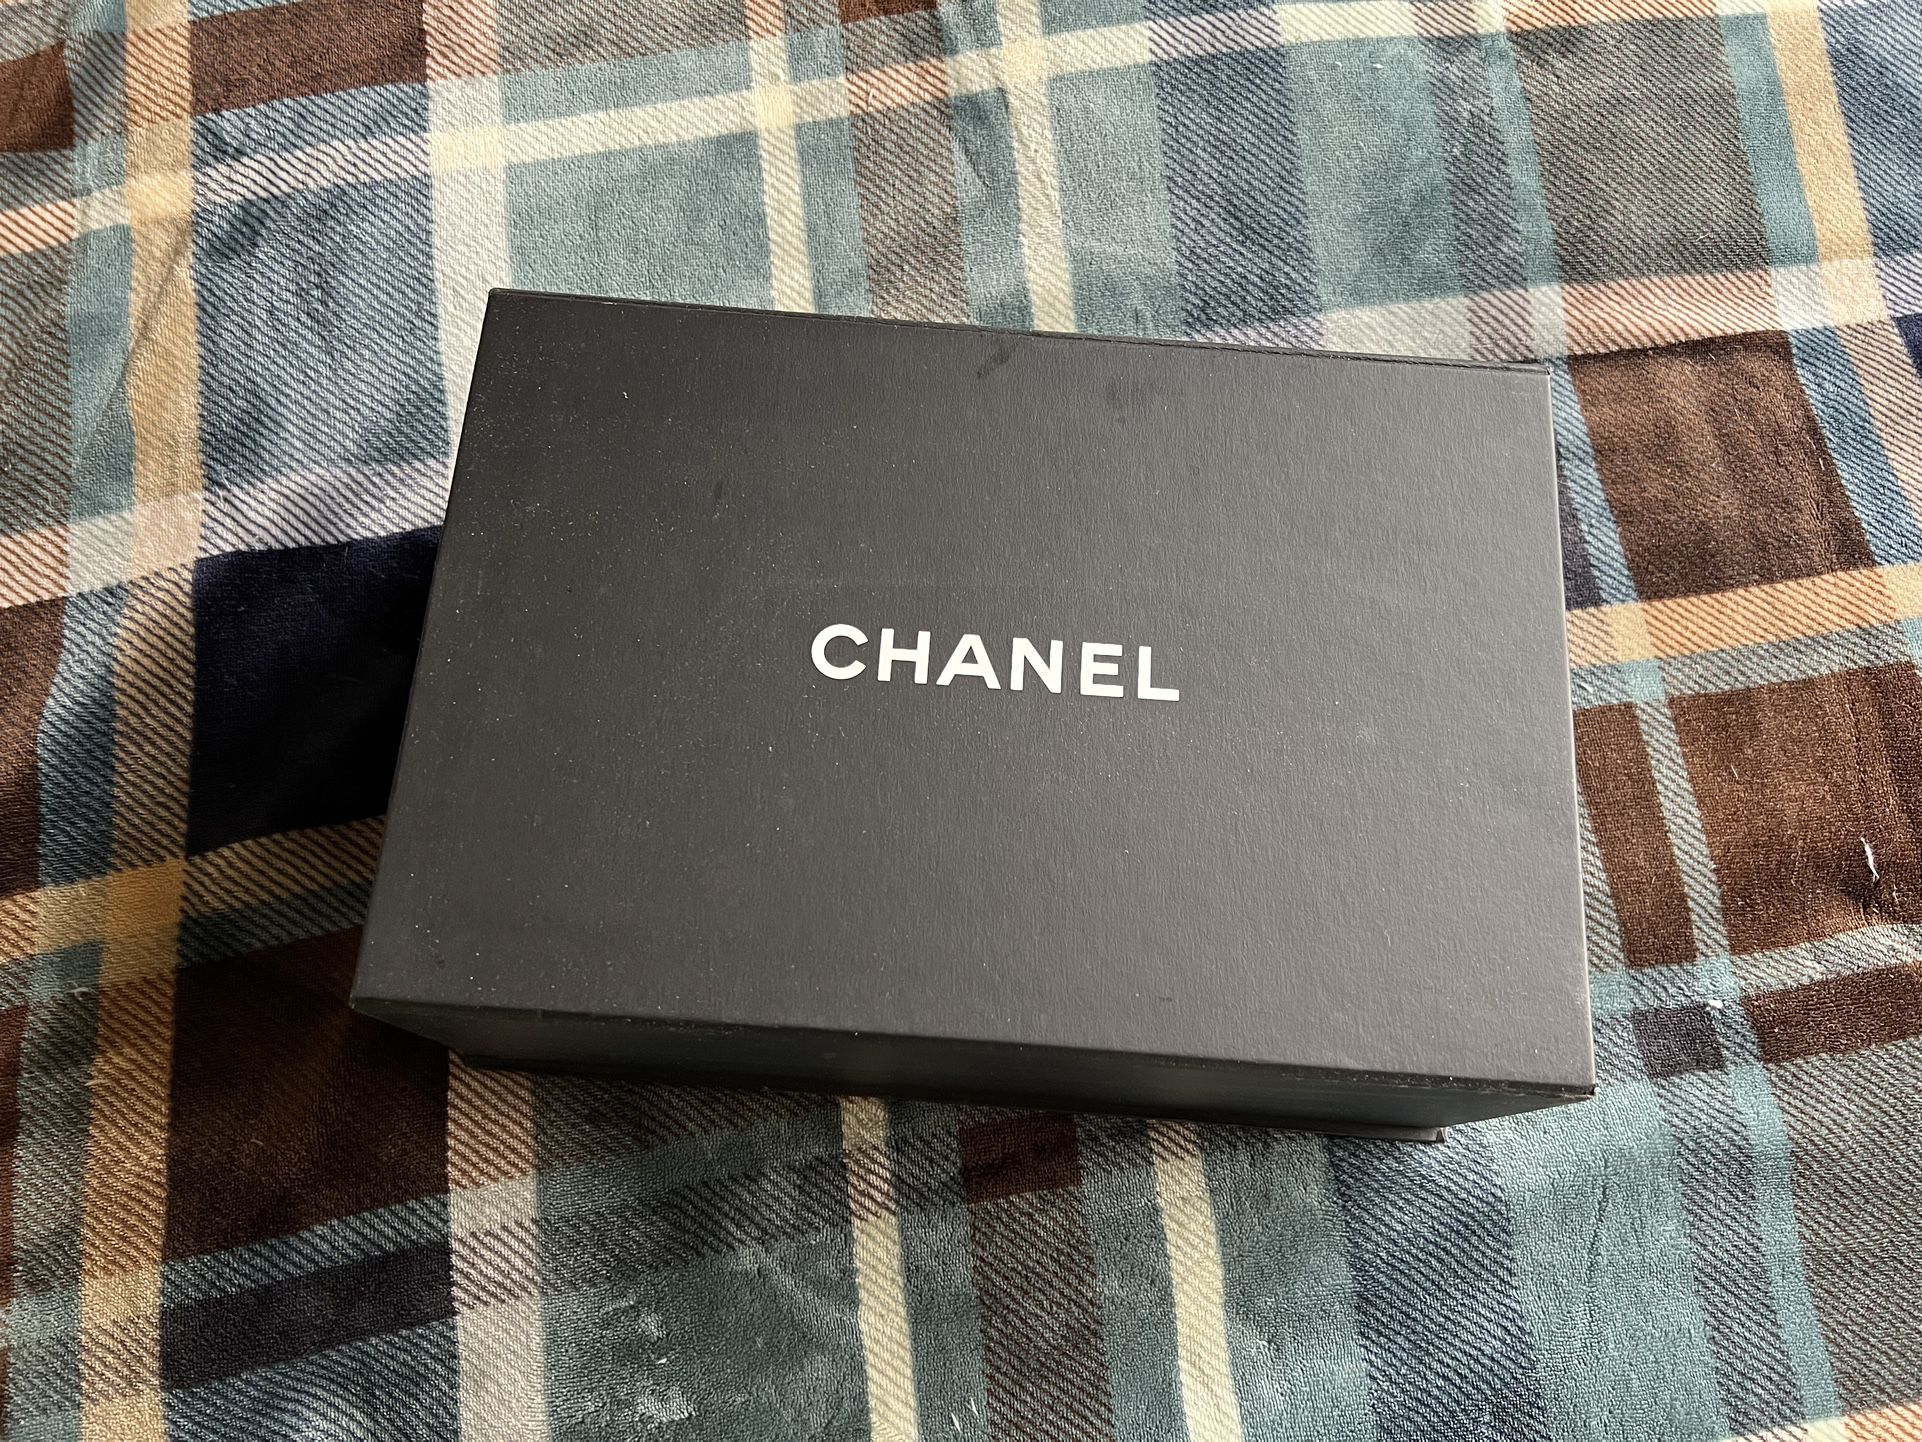 Chanel gift box for purse/shoes/clothing - 30.5*20.5*11.5cm for